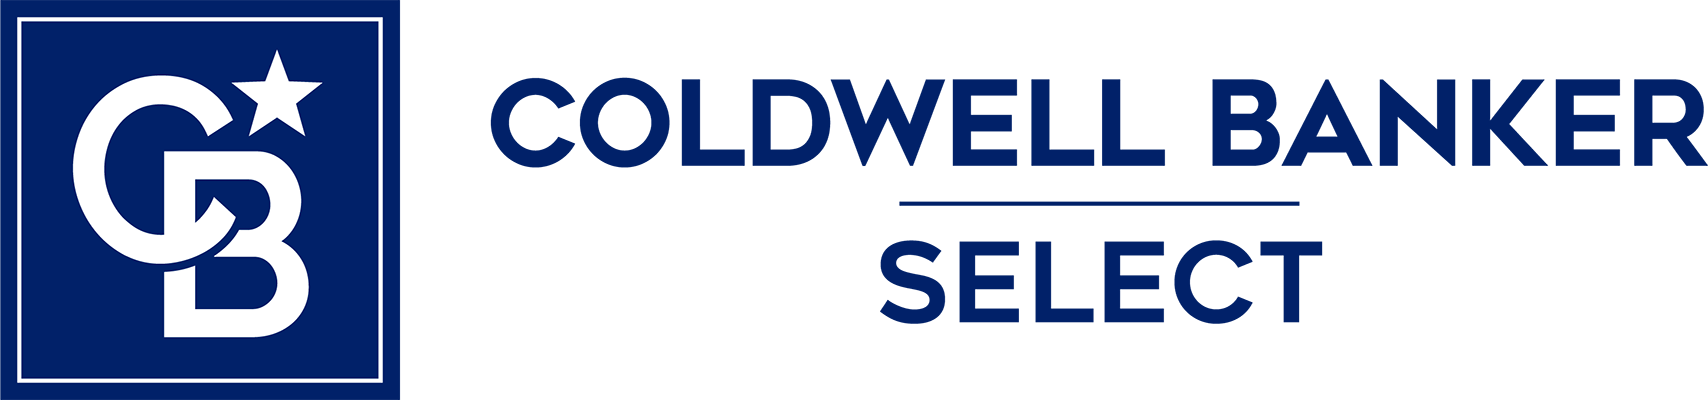 Larry Pitts - Coldwell Banker Select Logo